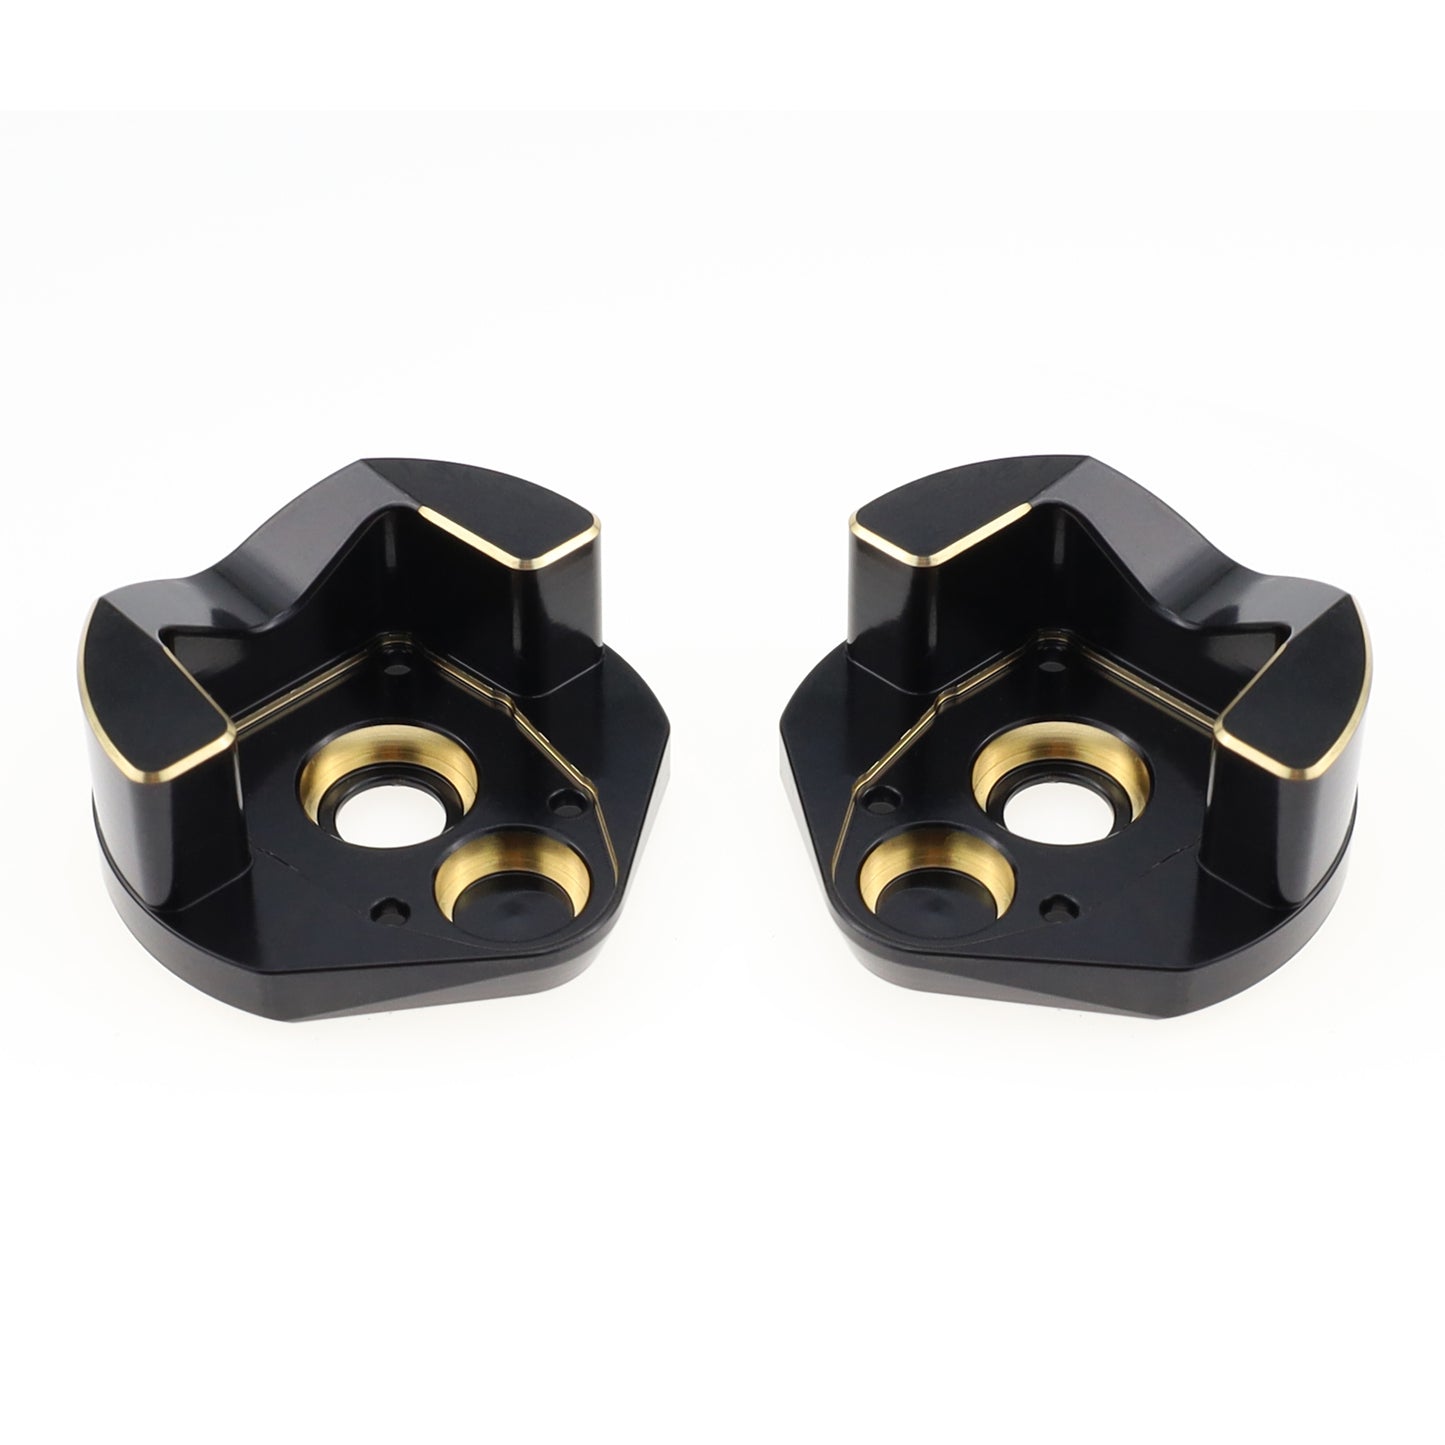 Treal Brass Outer Portal Covers Weights 93g for Axial Capra UTB/SCX10 III -Type B